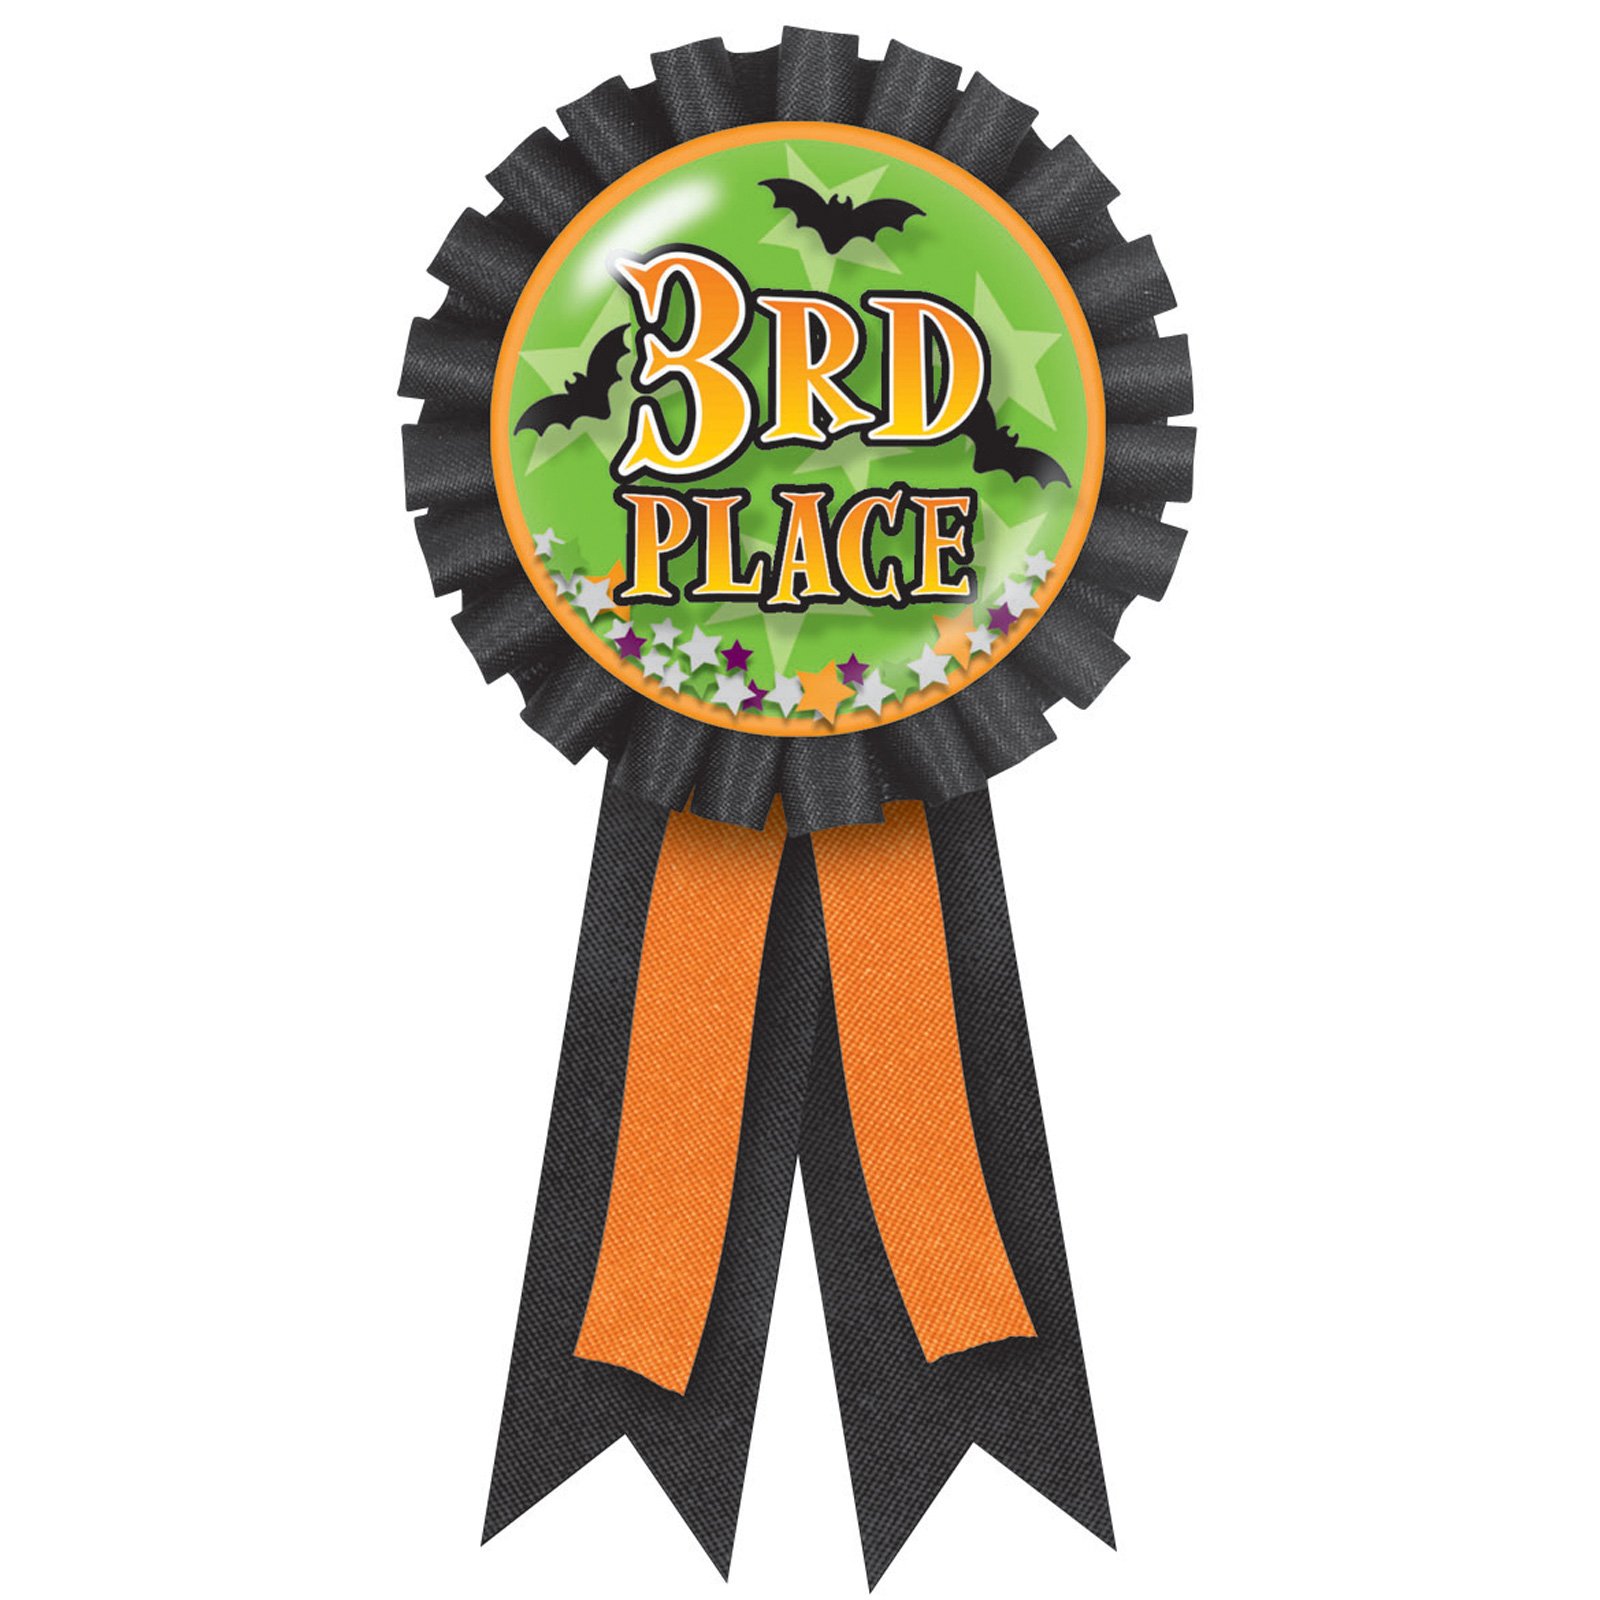 3rd Place Clip Art Http   Www Keywordpicture Com Keyword 3rd Place